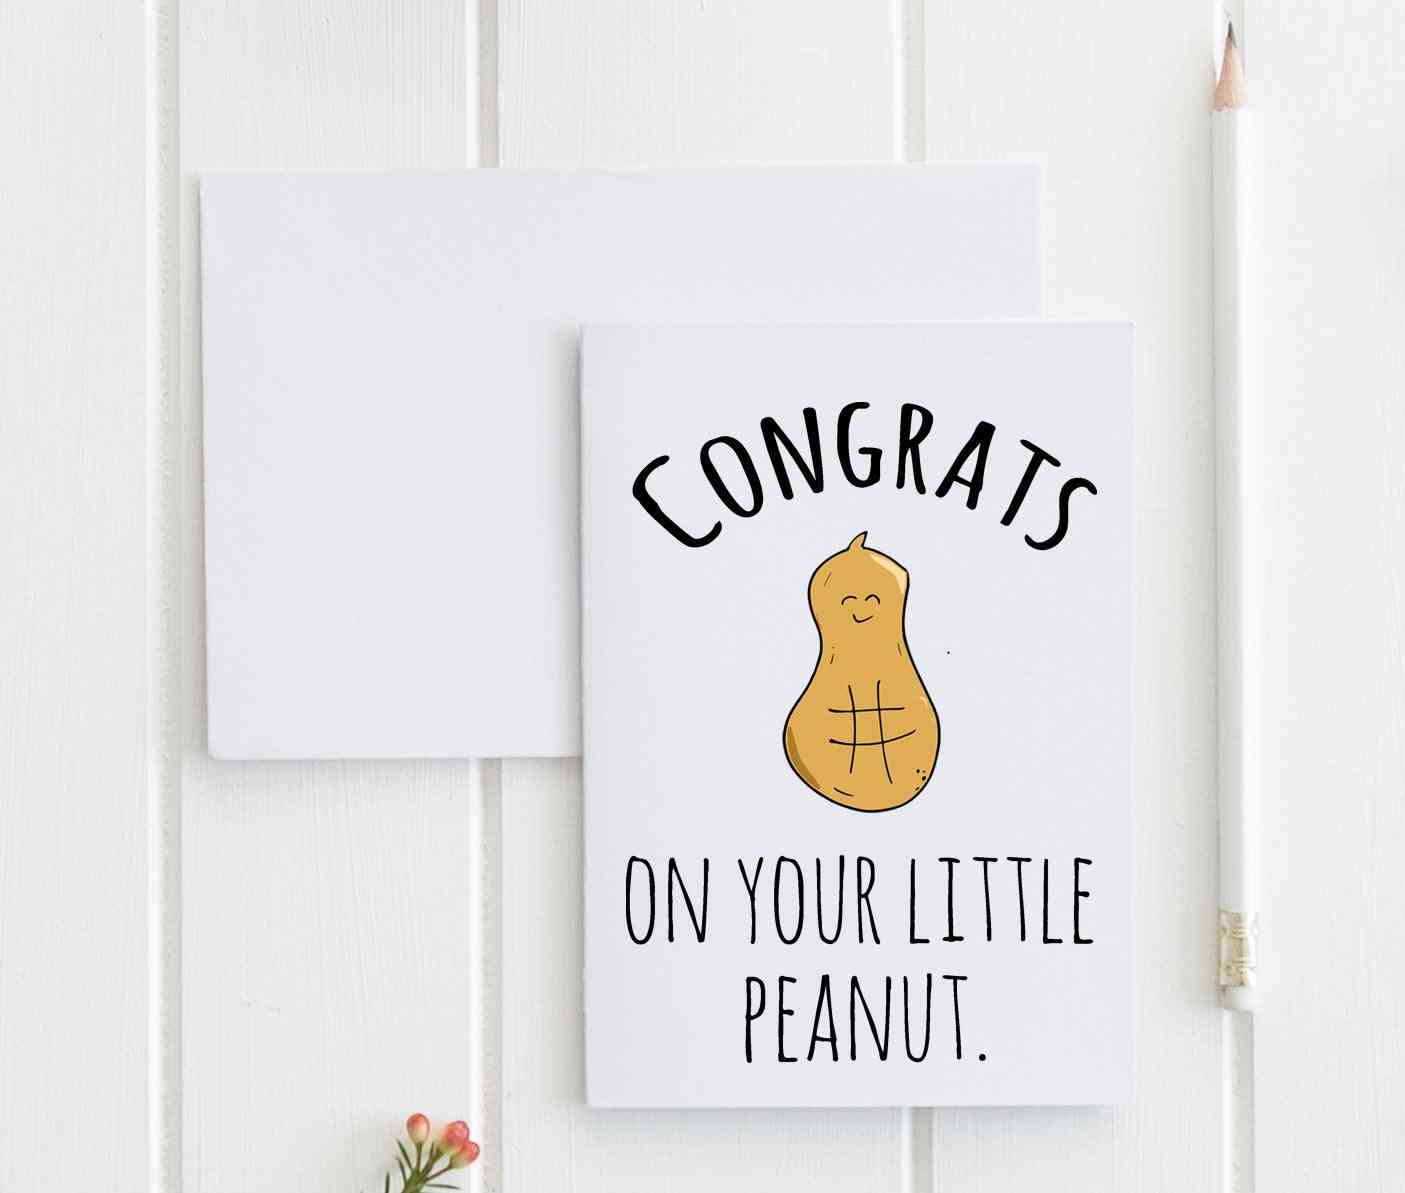 Congrats On Your Little Peanut  - Greeting Card